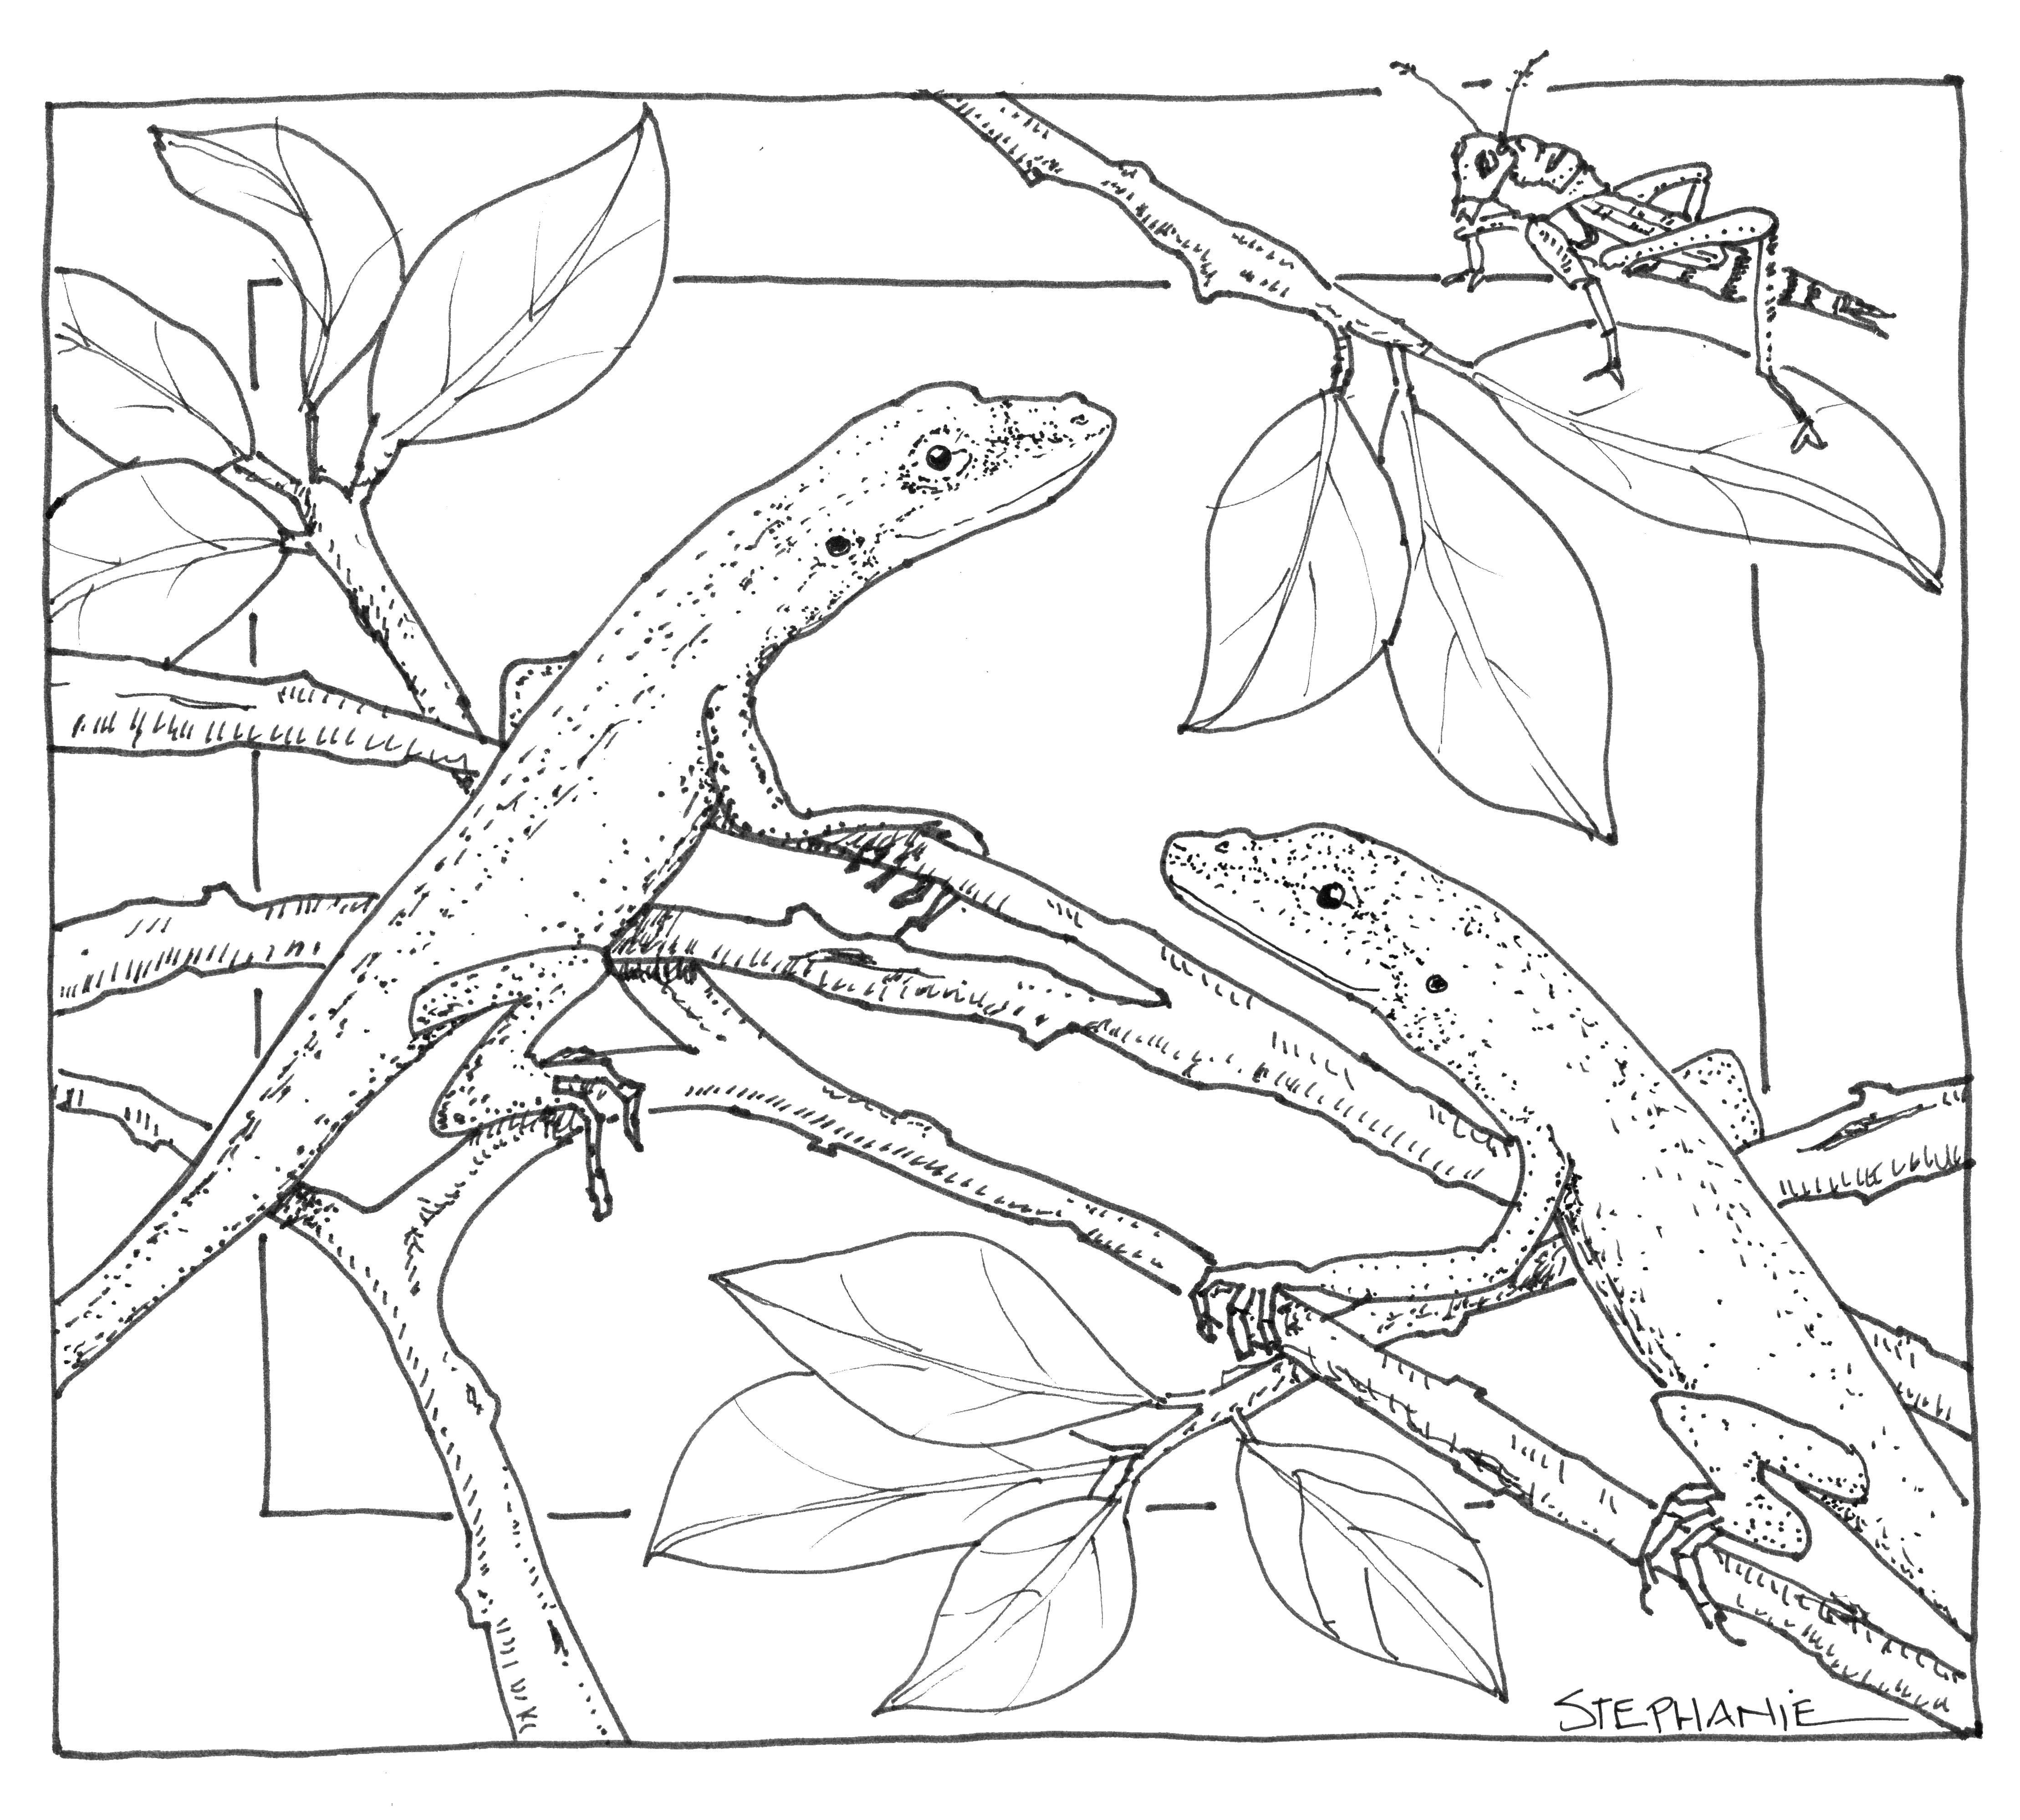 Coloring Lizards on branches. Category nature. Tags:  Reptile, lizard.